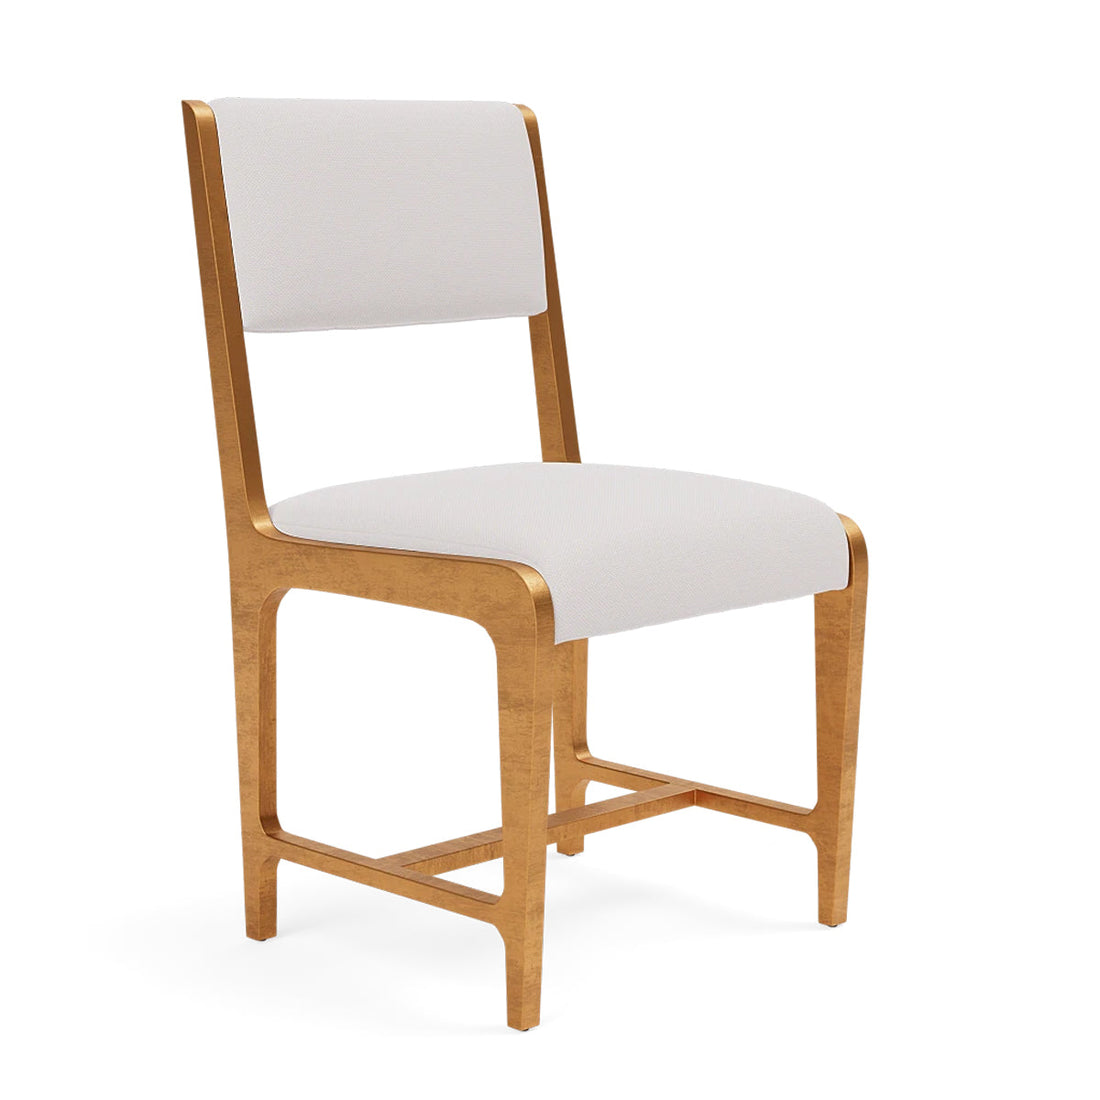 Made Goods Vallois Contemporary Metal Side Chair in Alsek Fabric